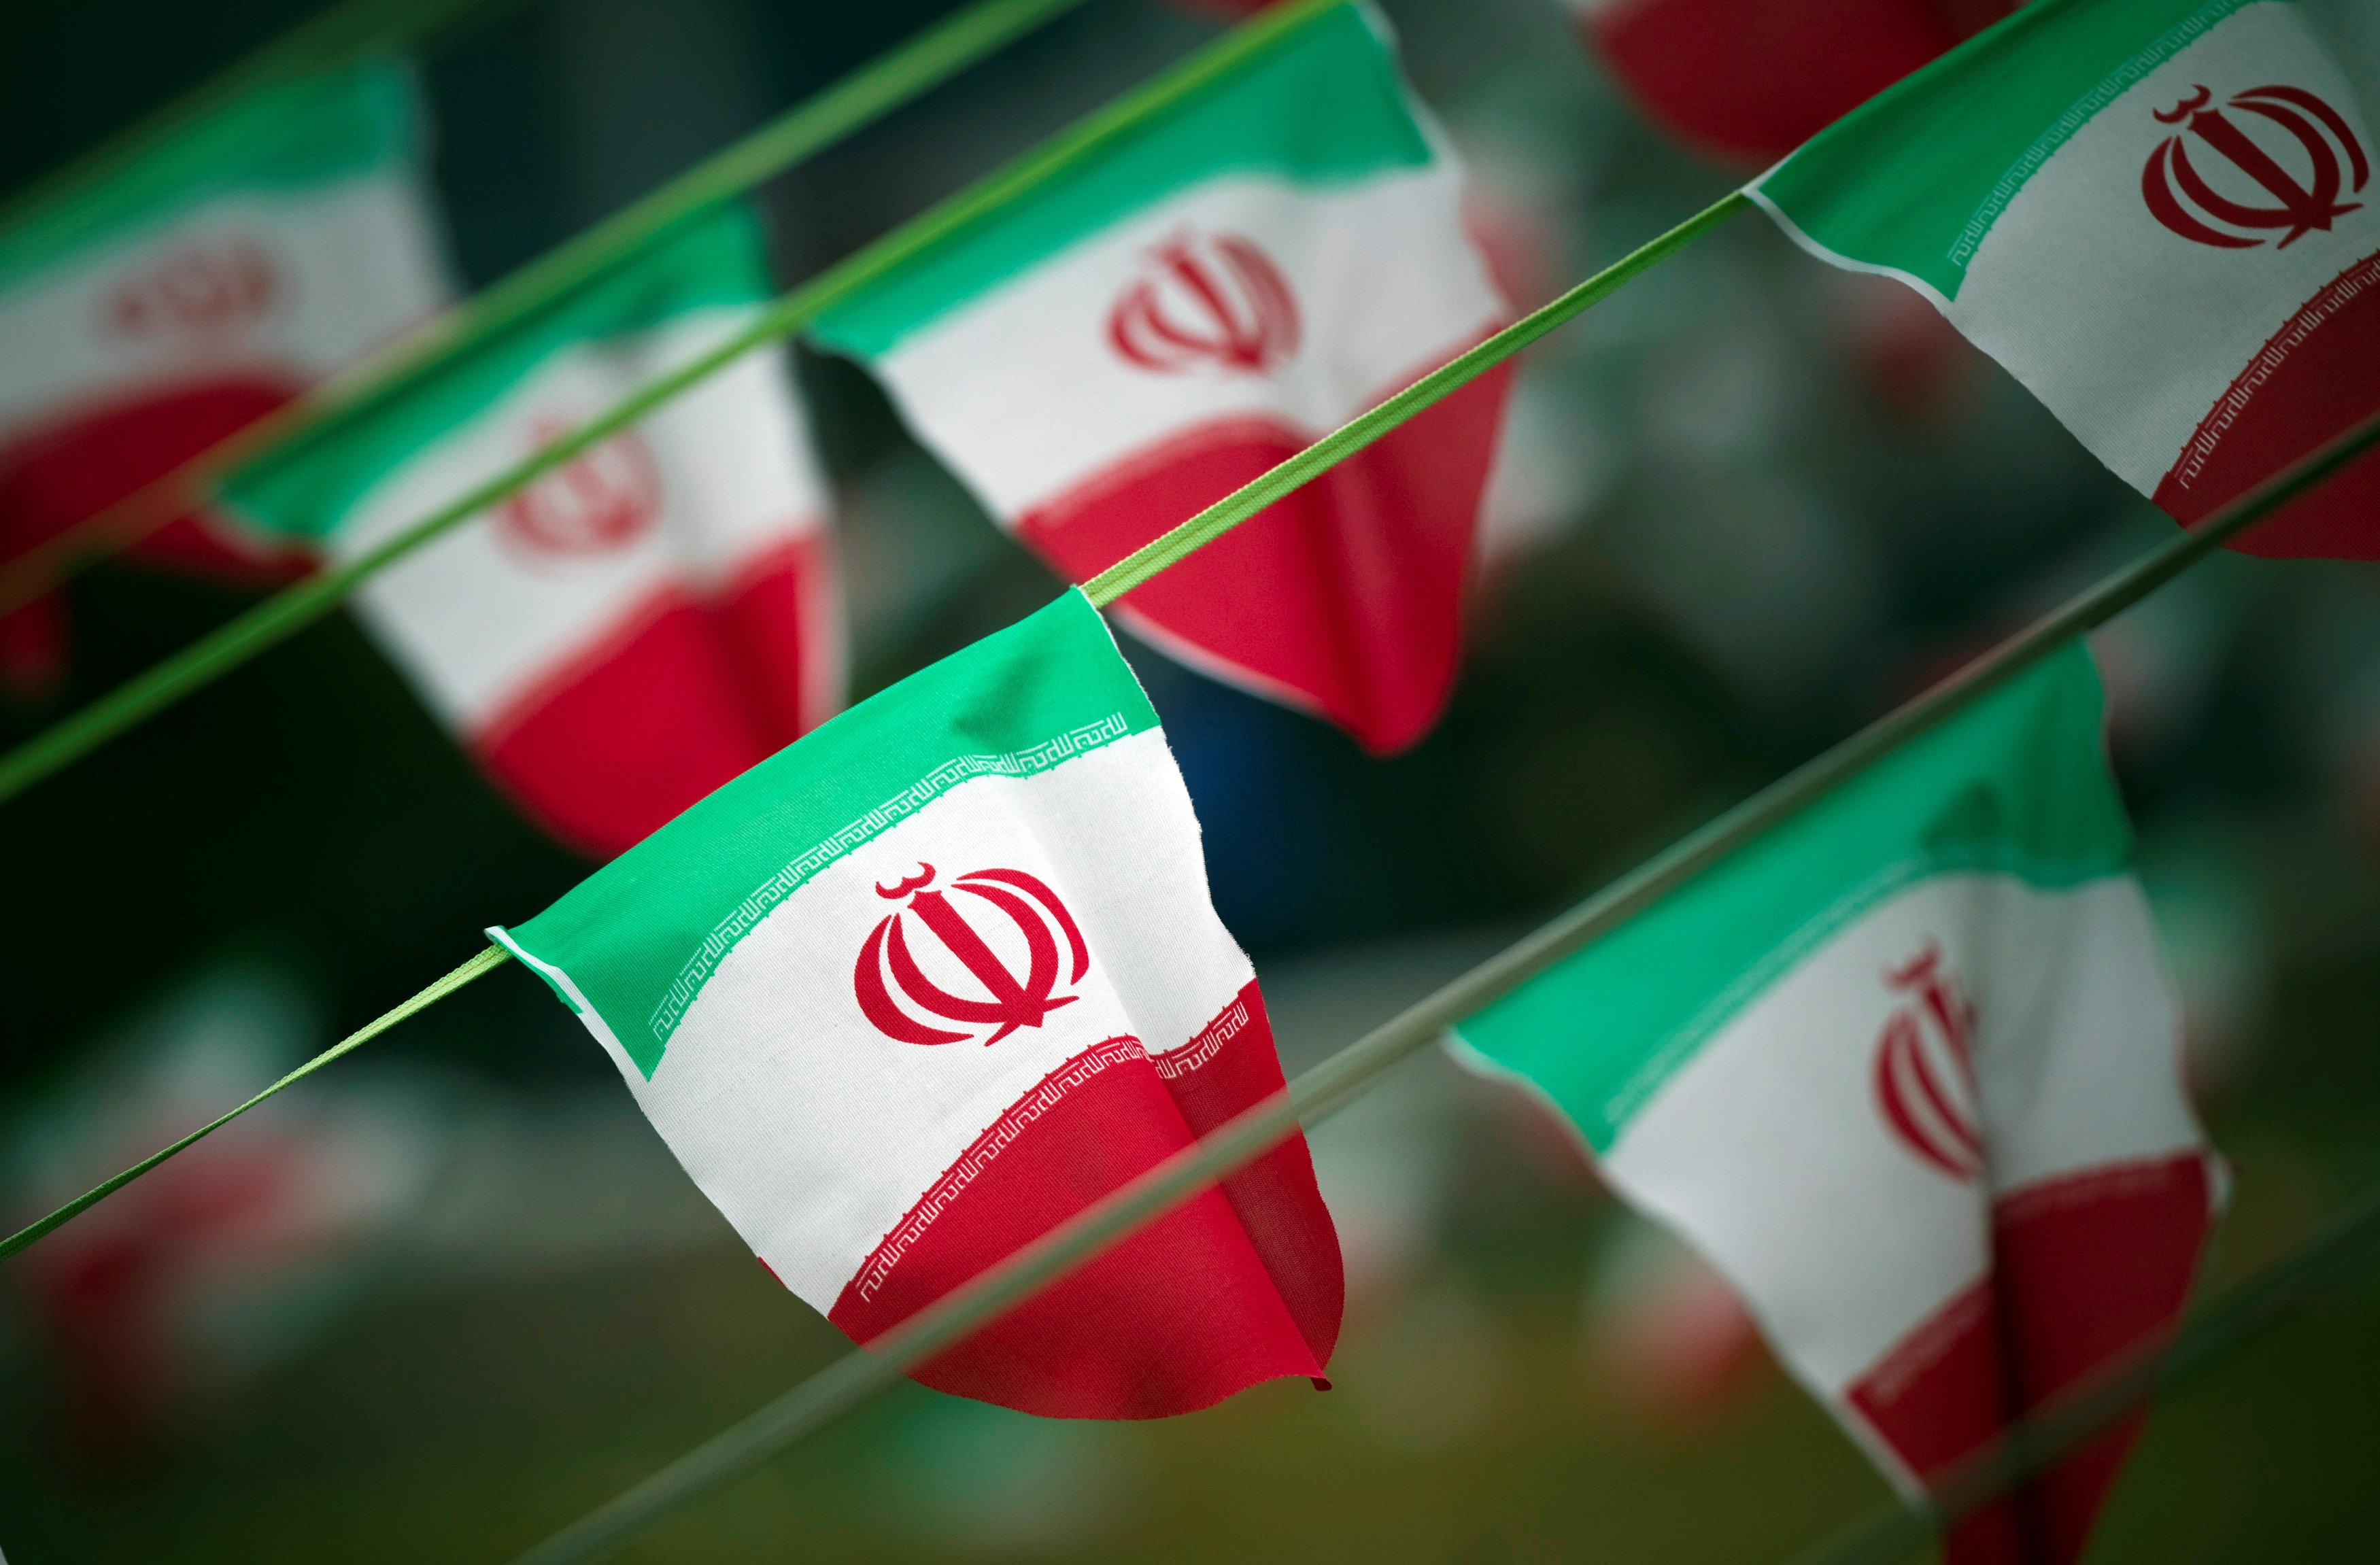 Iran-backed hackers linked to espionage advertising campaign targeting journalists and activists thumbnail